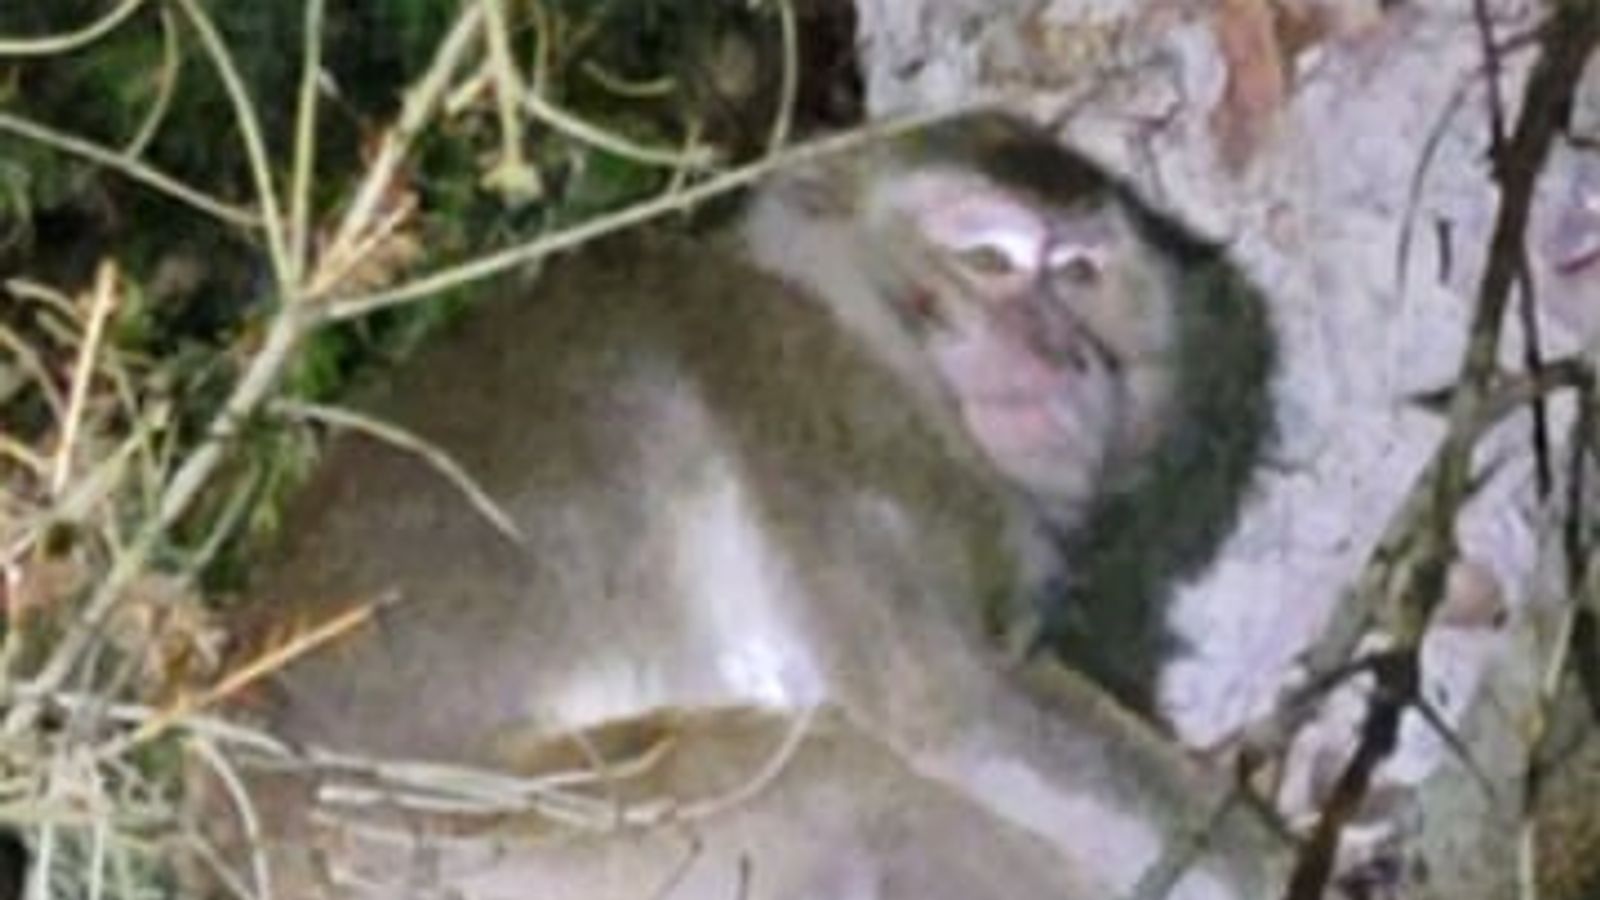 Brass monkeys: Fears for escaped primates as Pennsylvania temperatures drop to -20C